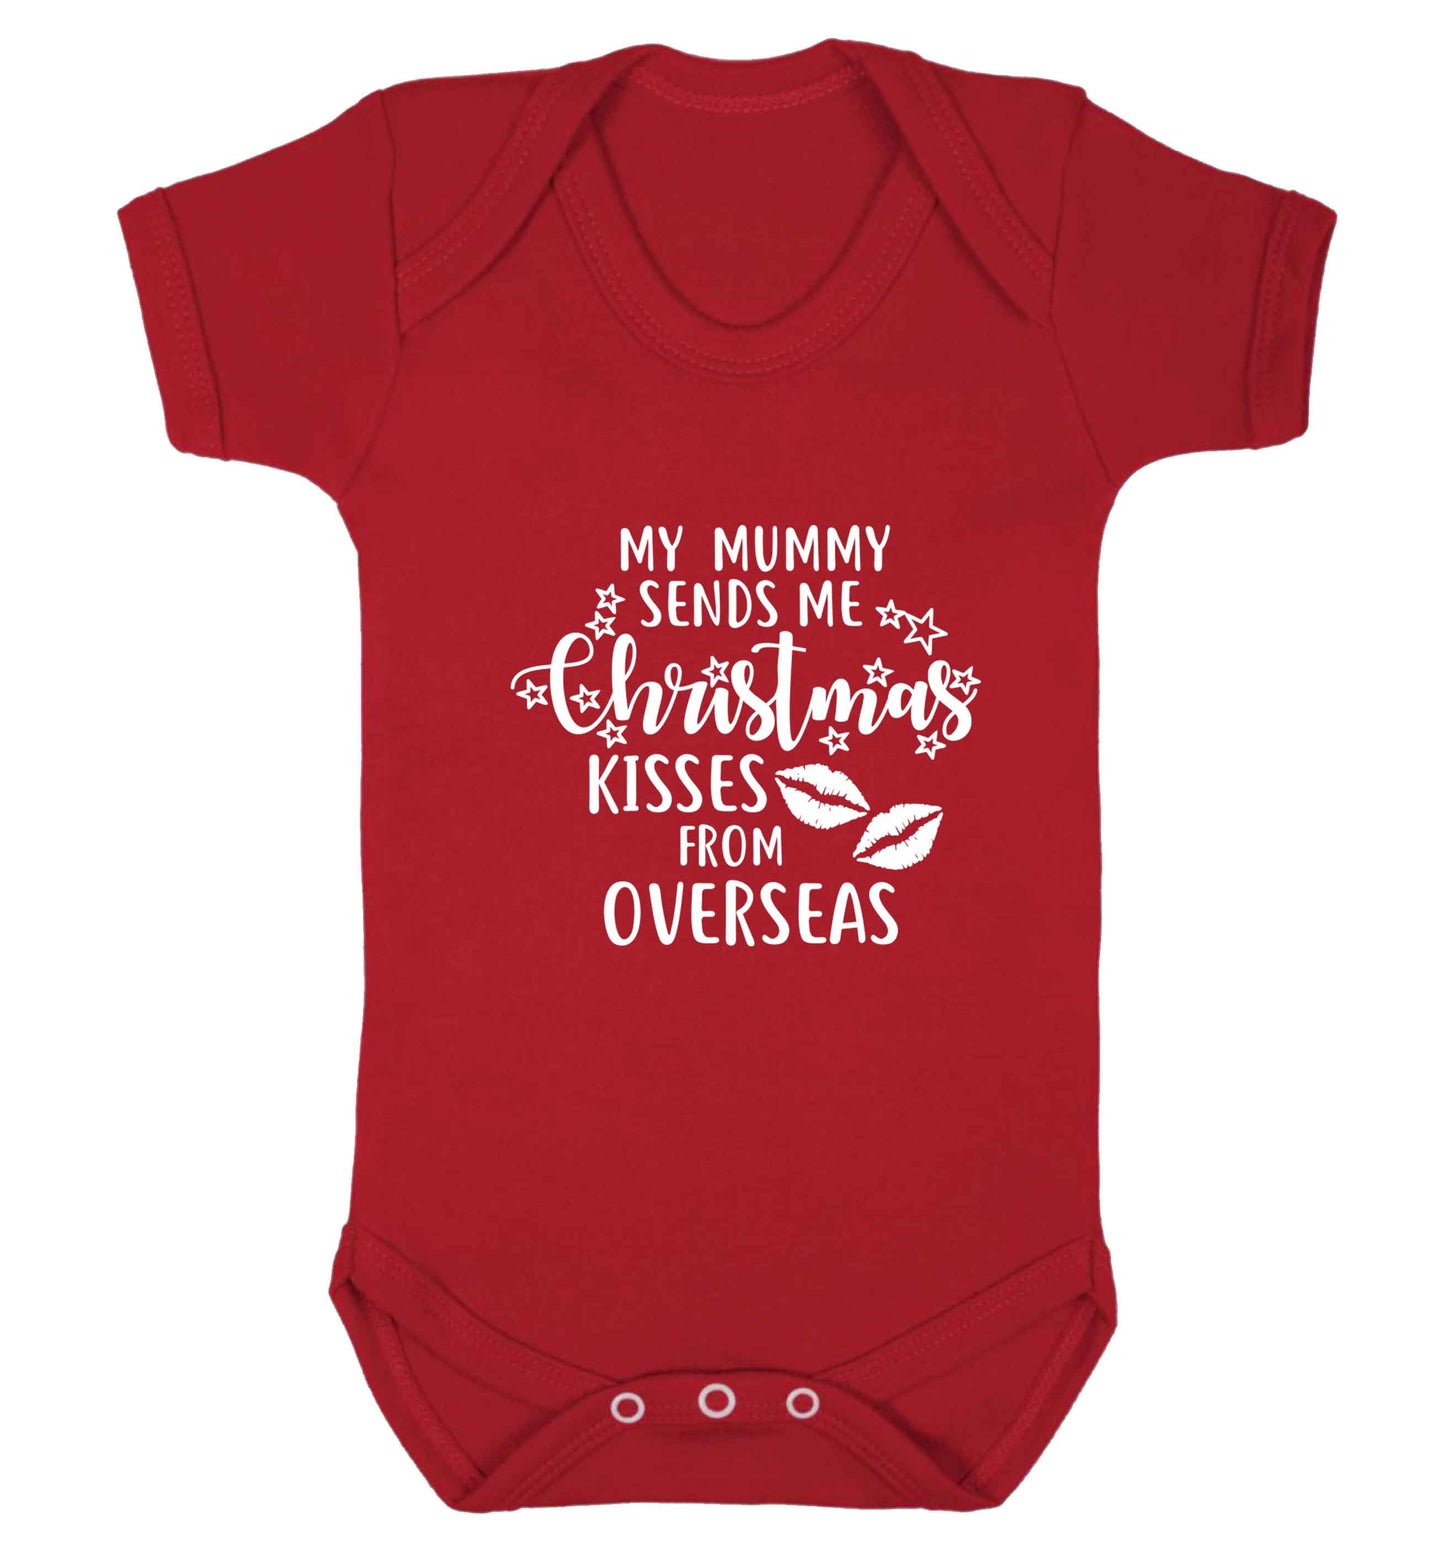 Mummy Christmas Kisses Overseas baby vest red 18-24 months